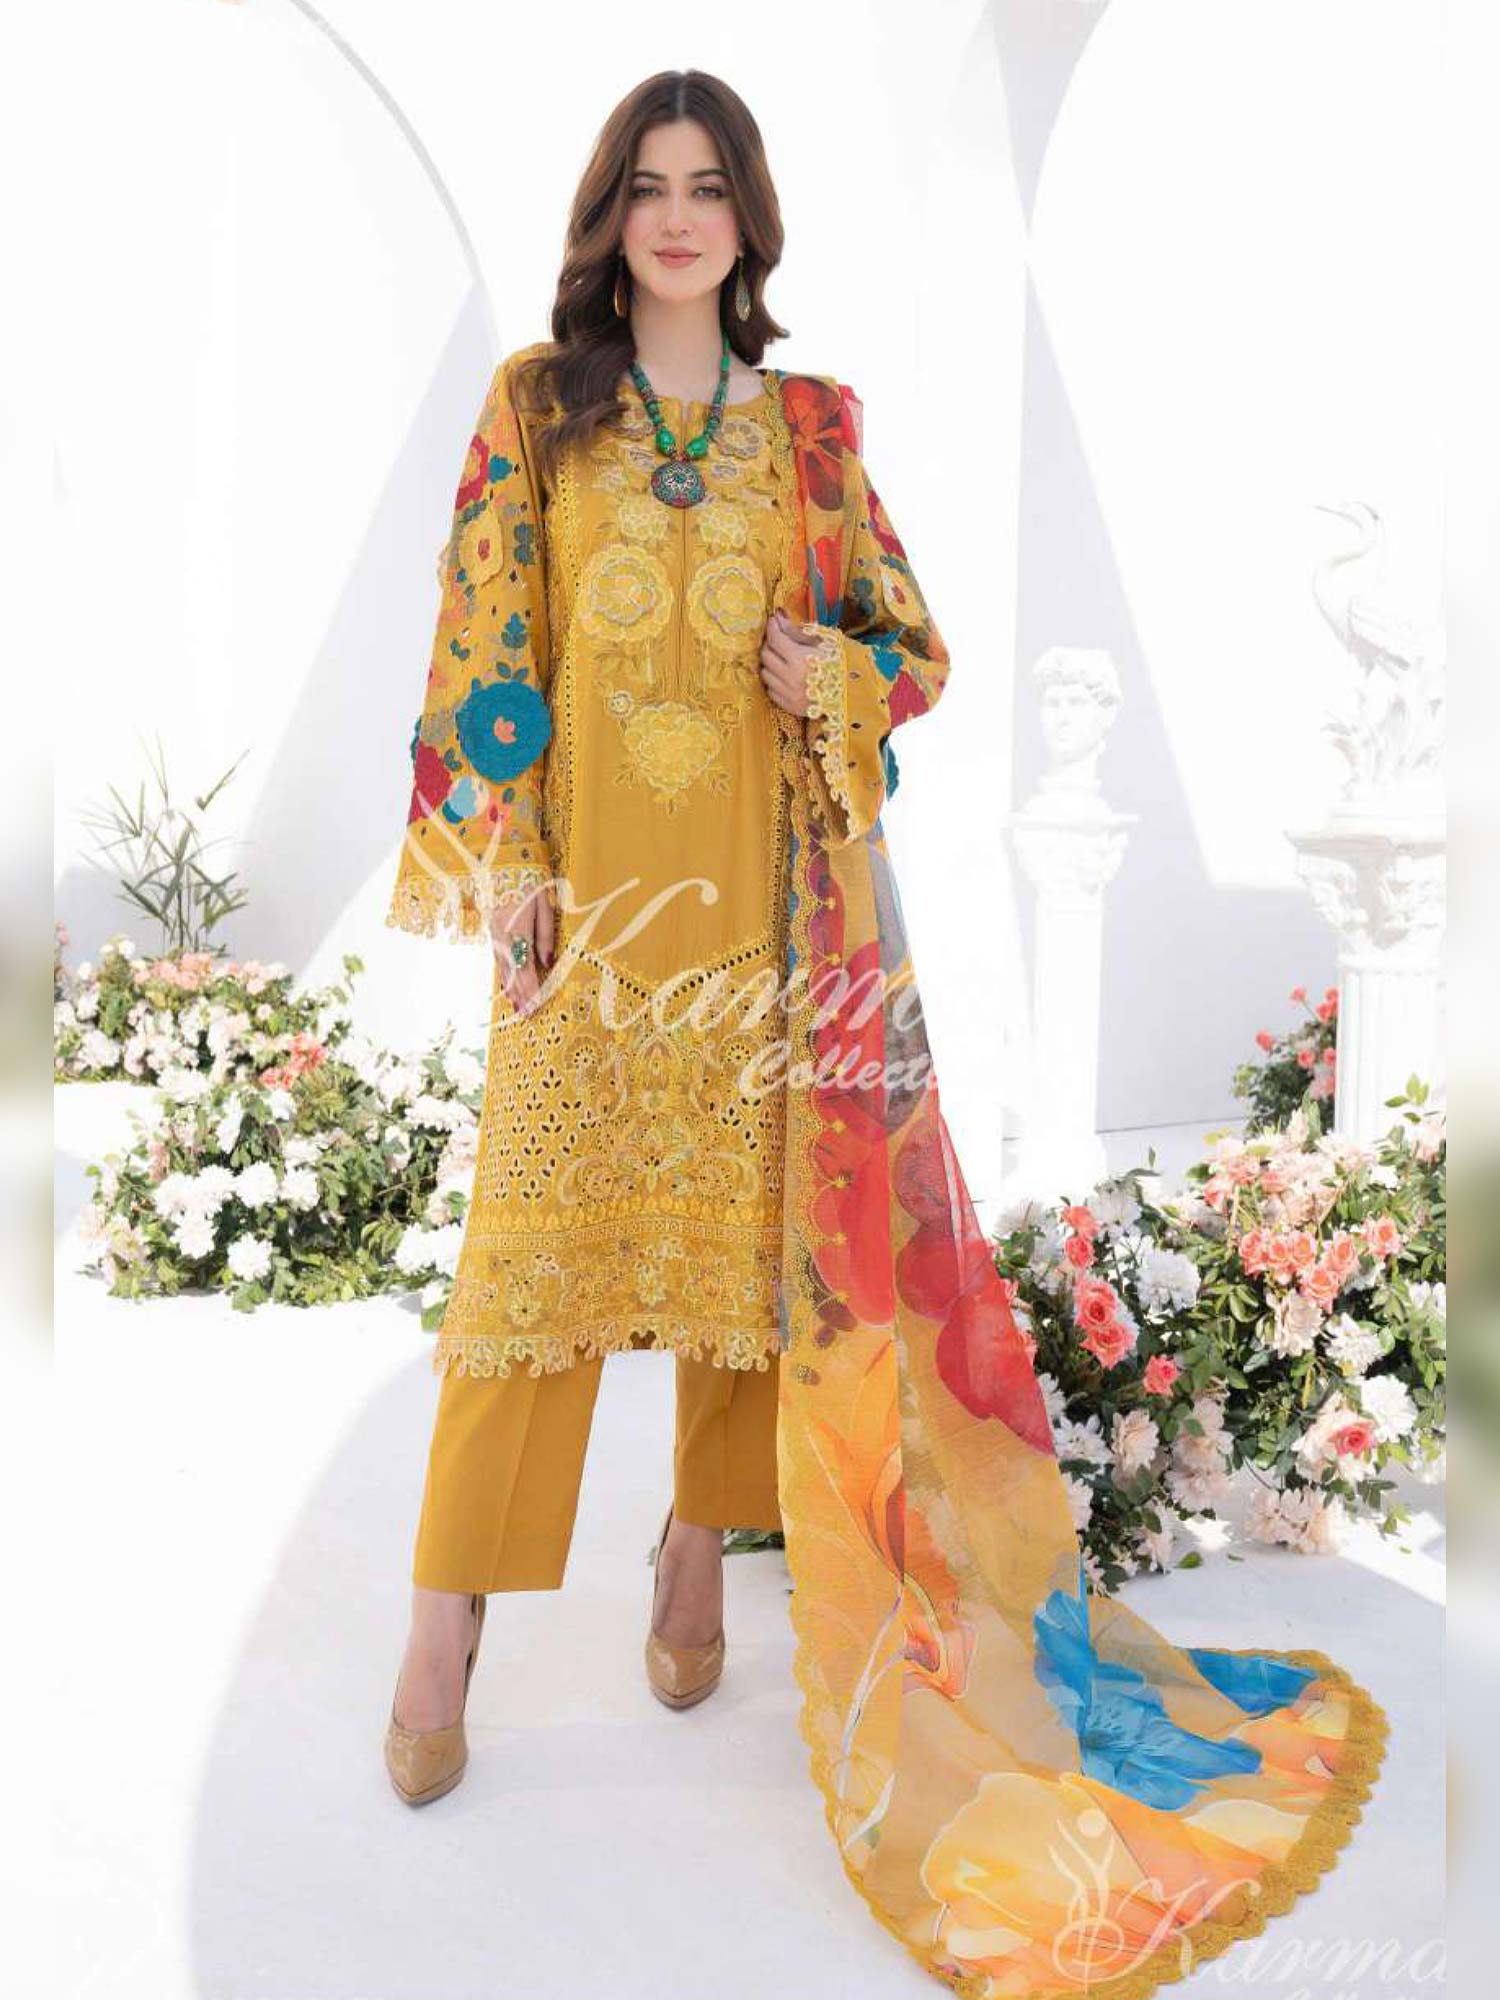 Karma Collection Mustard Cotton Embroidered Suit (KC1333)